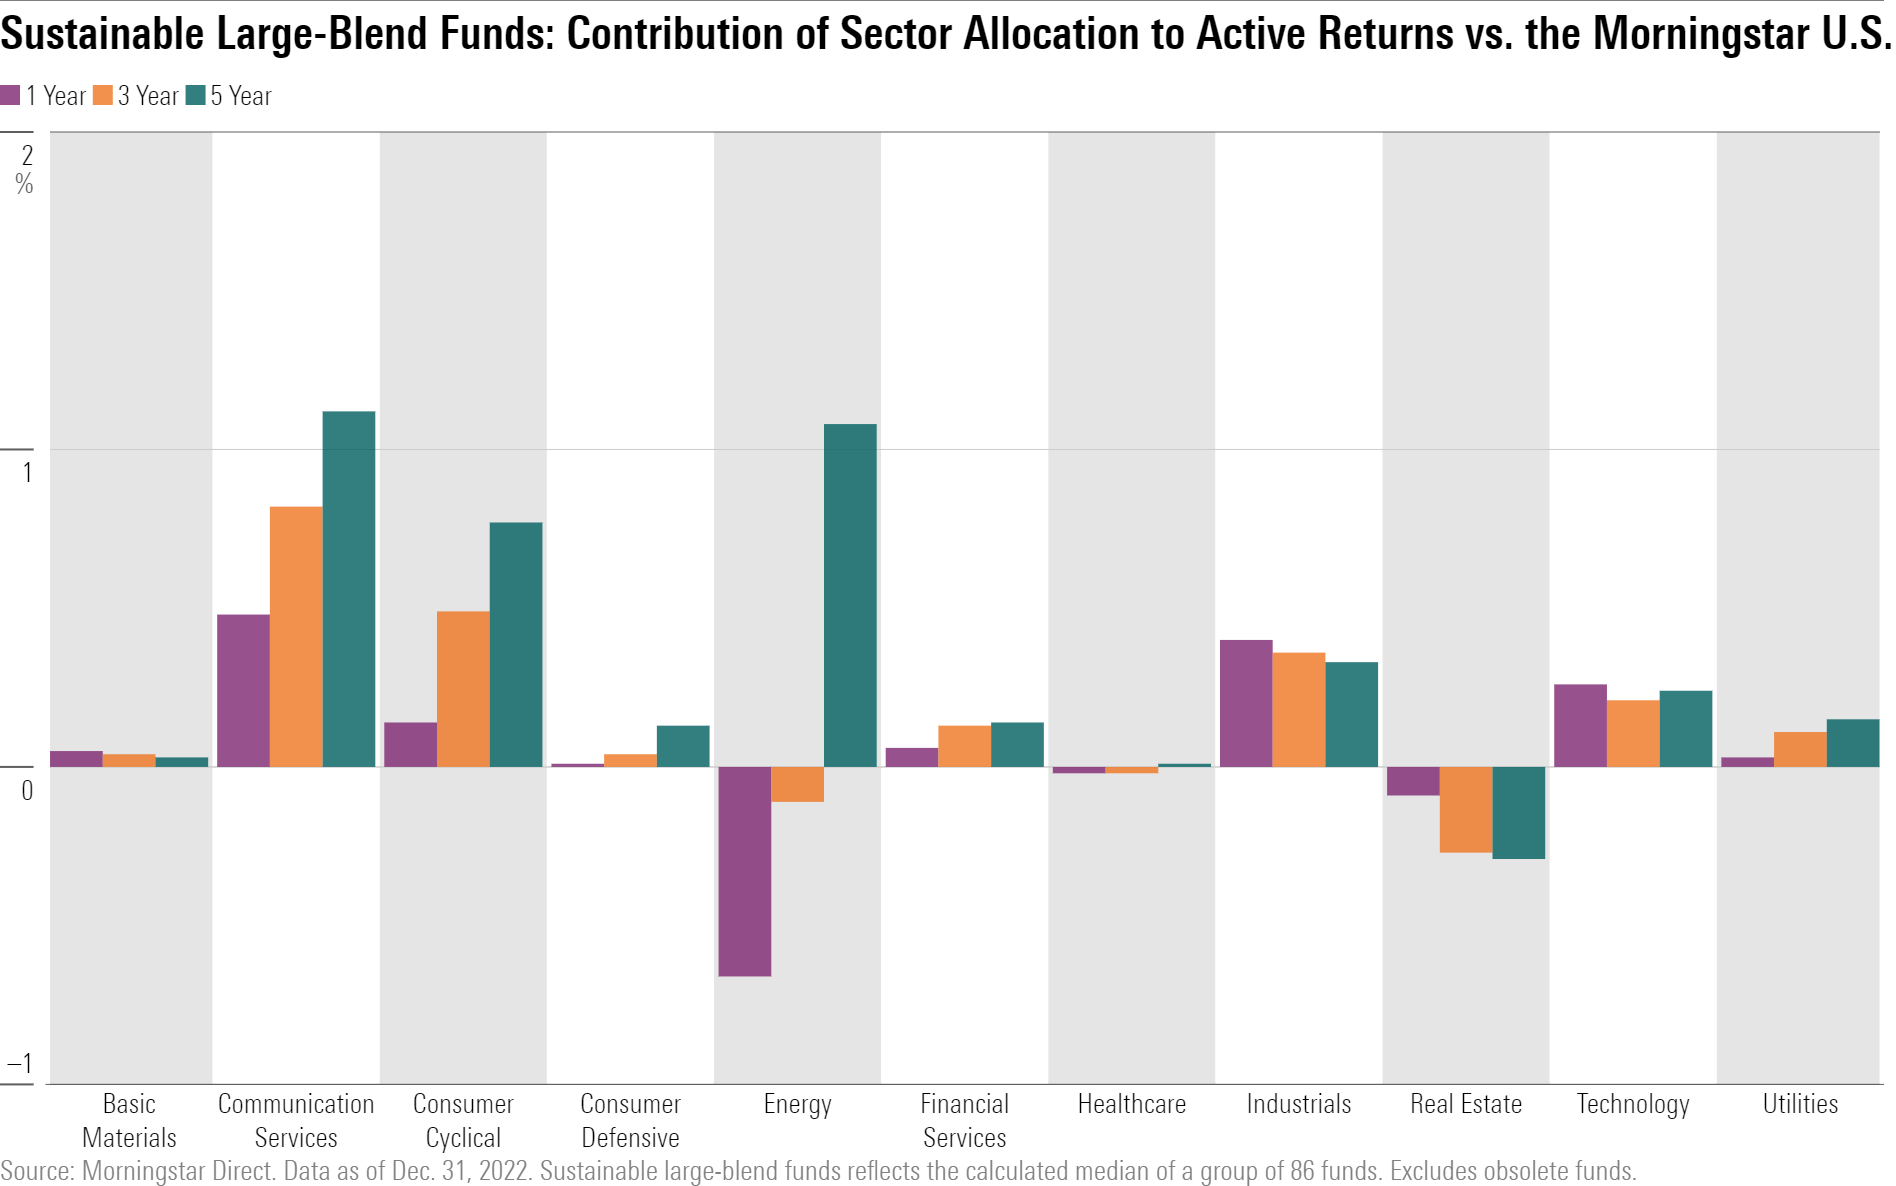 Bar chart showing the effect of sustainable funds' sector allocation over the trailing one, three, and five years.